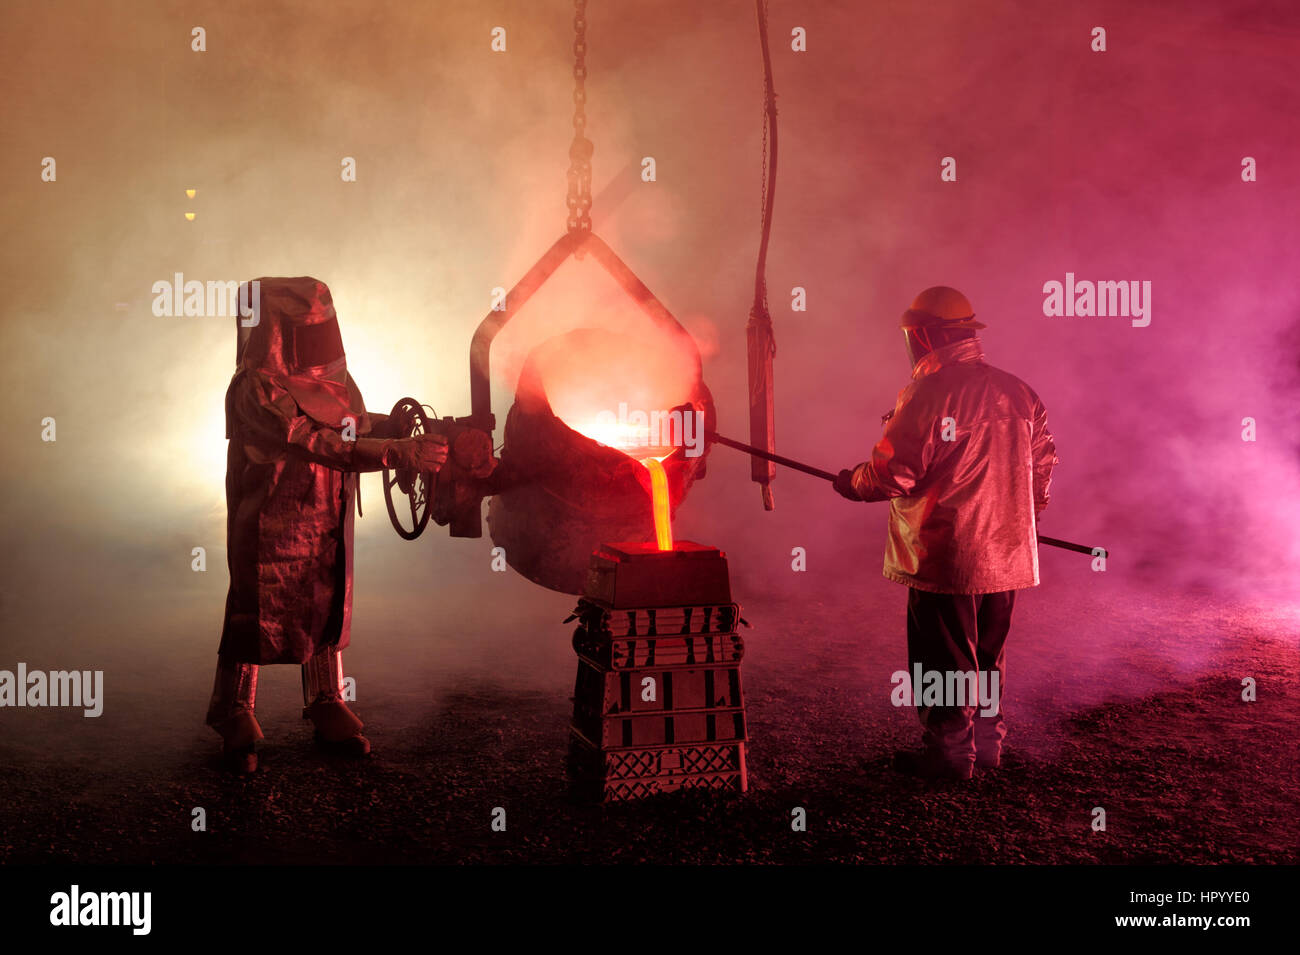 Pouring molten iron in a steel mill reenactment, metallurgical workers with ladle bucket, hot, smoky, and dangerous, Bethlehem, Pennsylvania, USA. Stock Photo